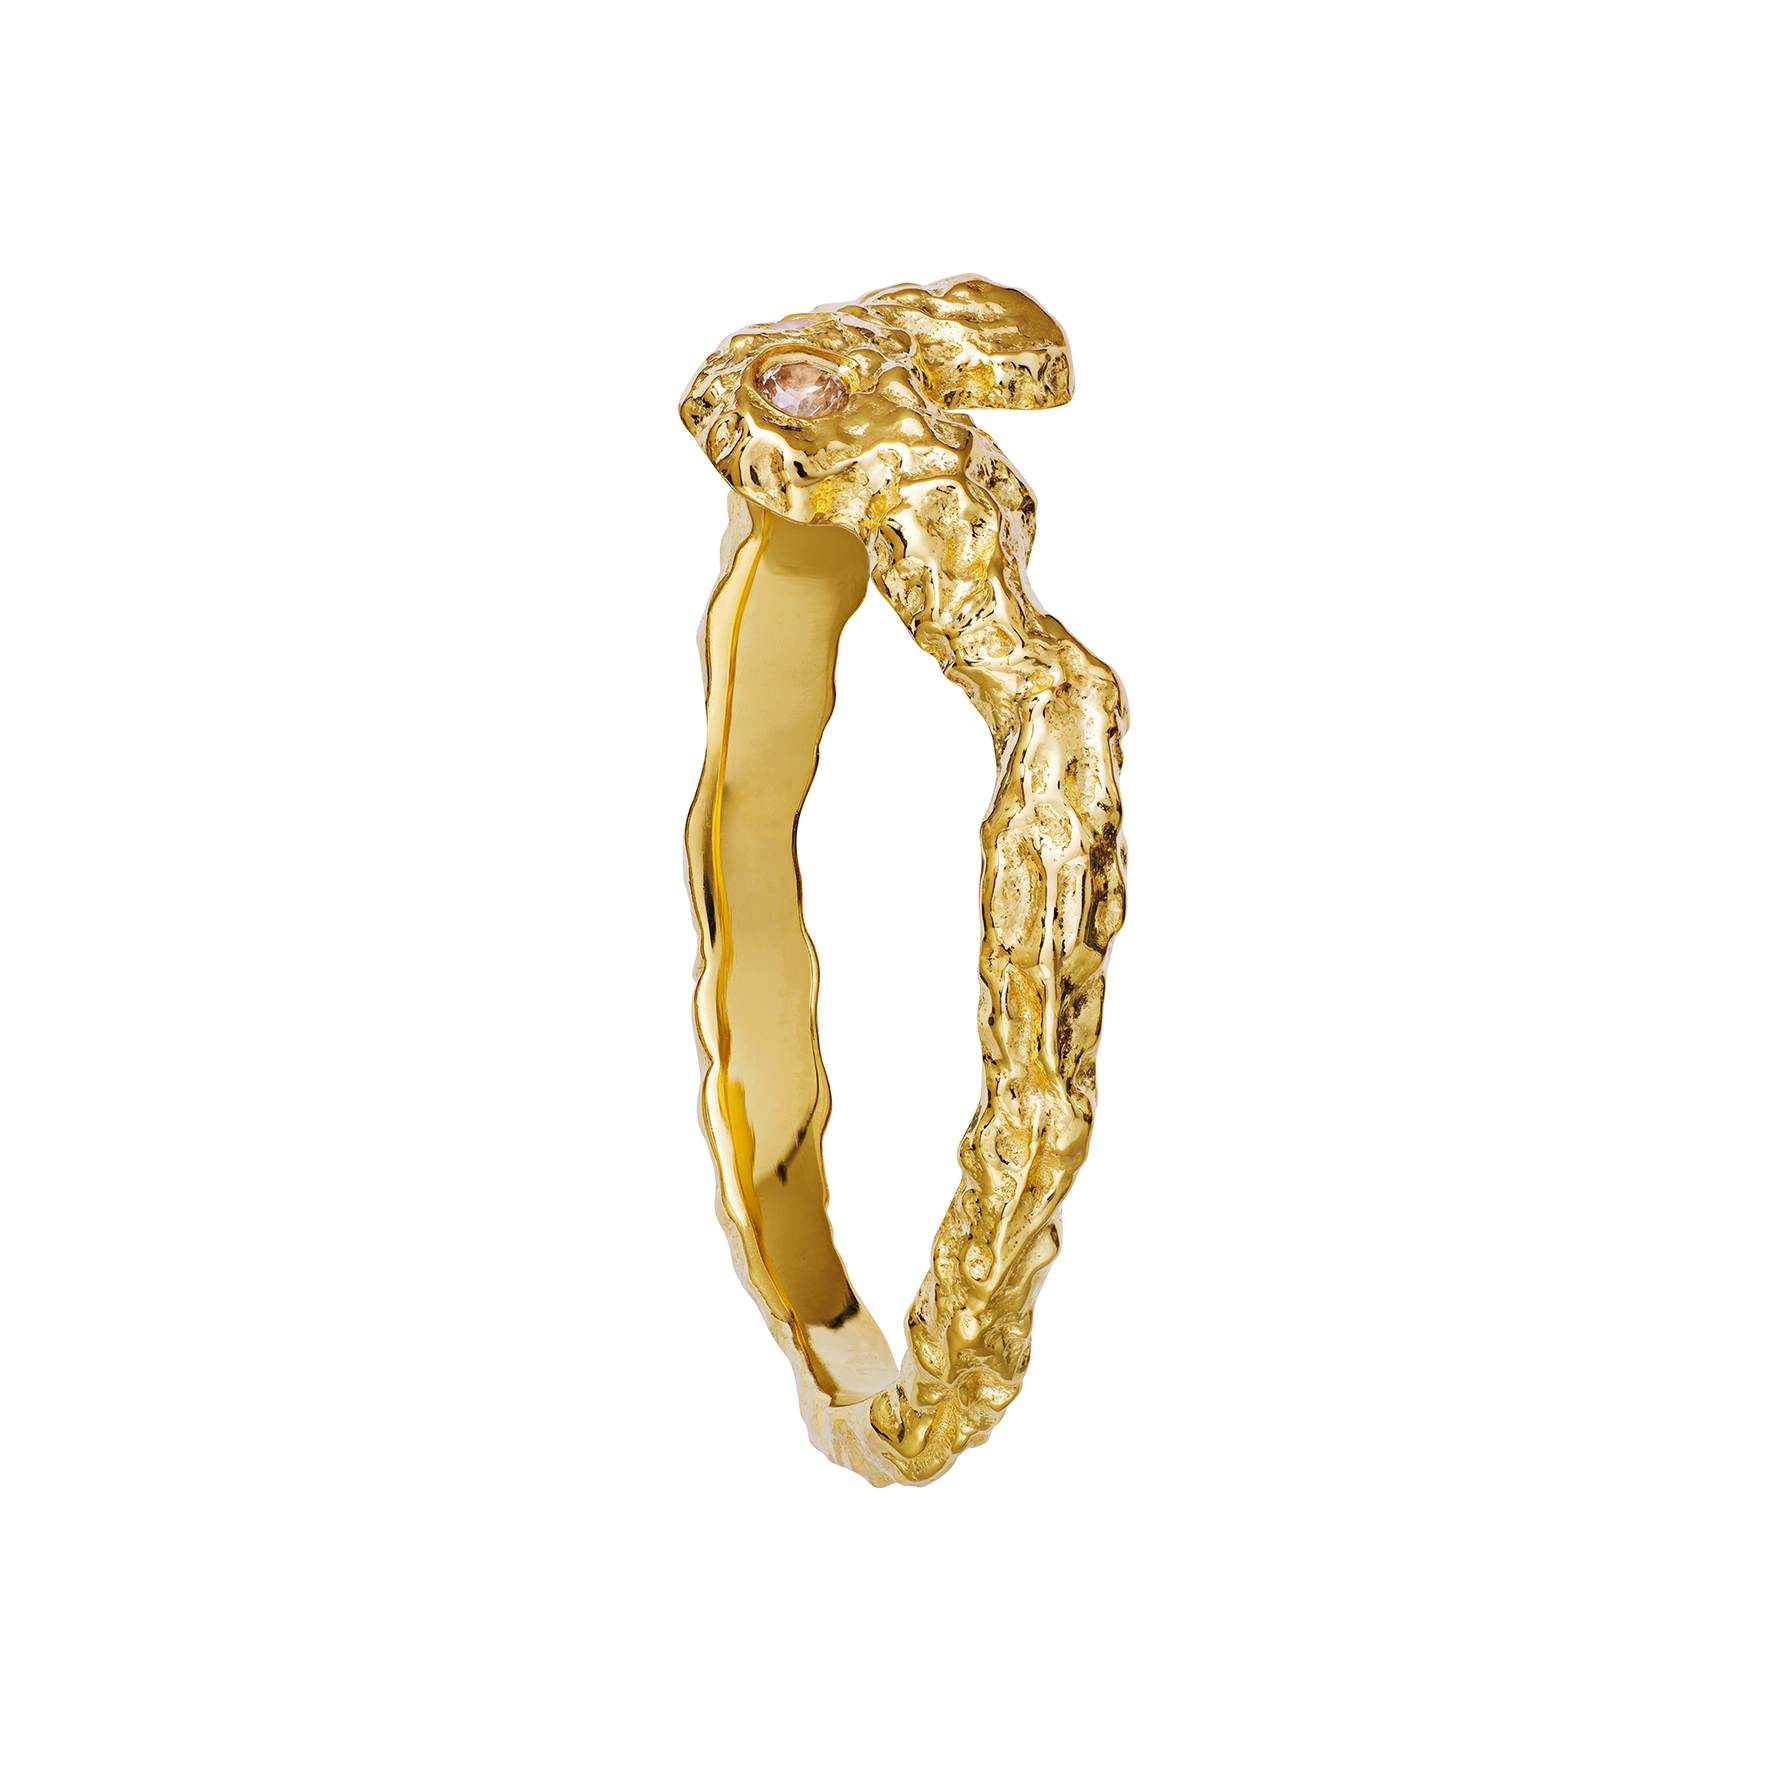 Frida Ring from Maanesten in Goldplated-Silver Sterling 925